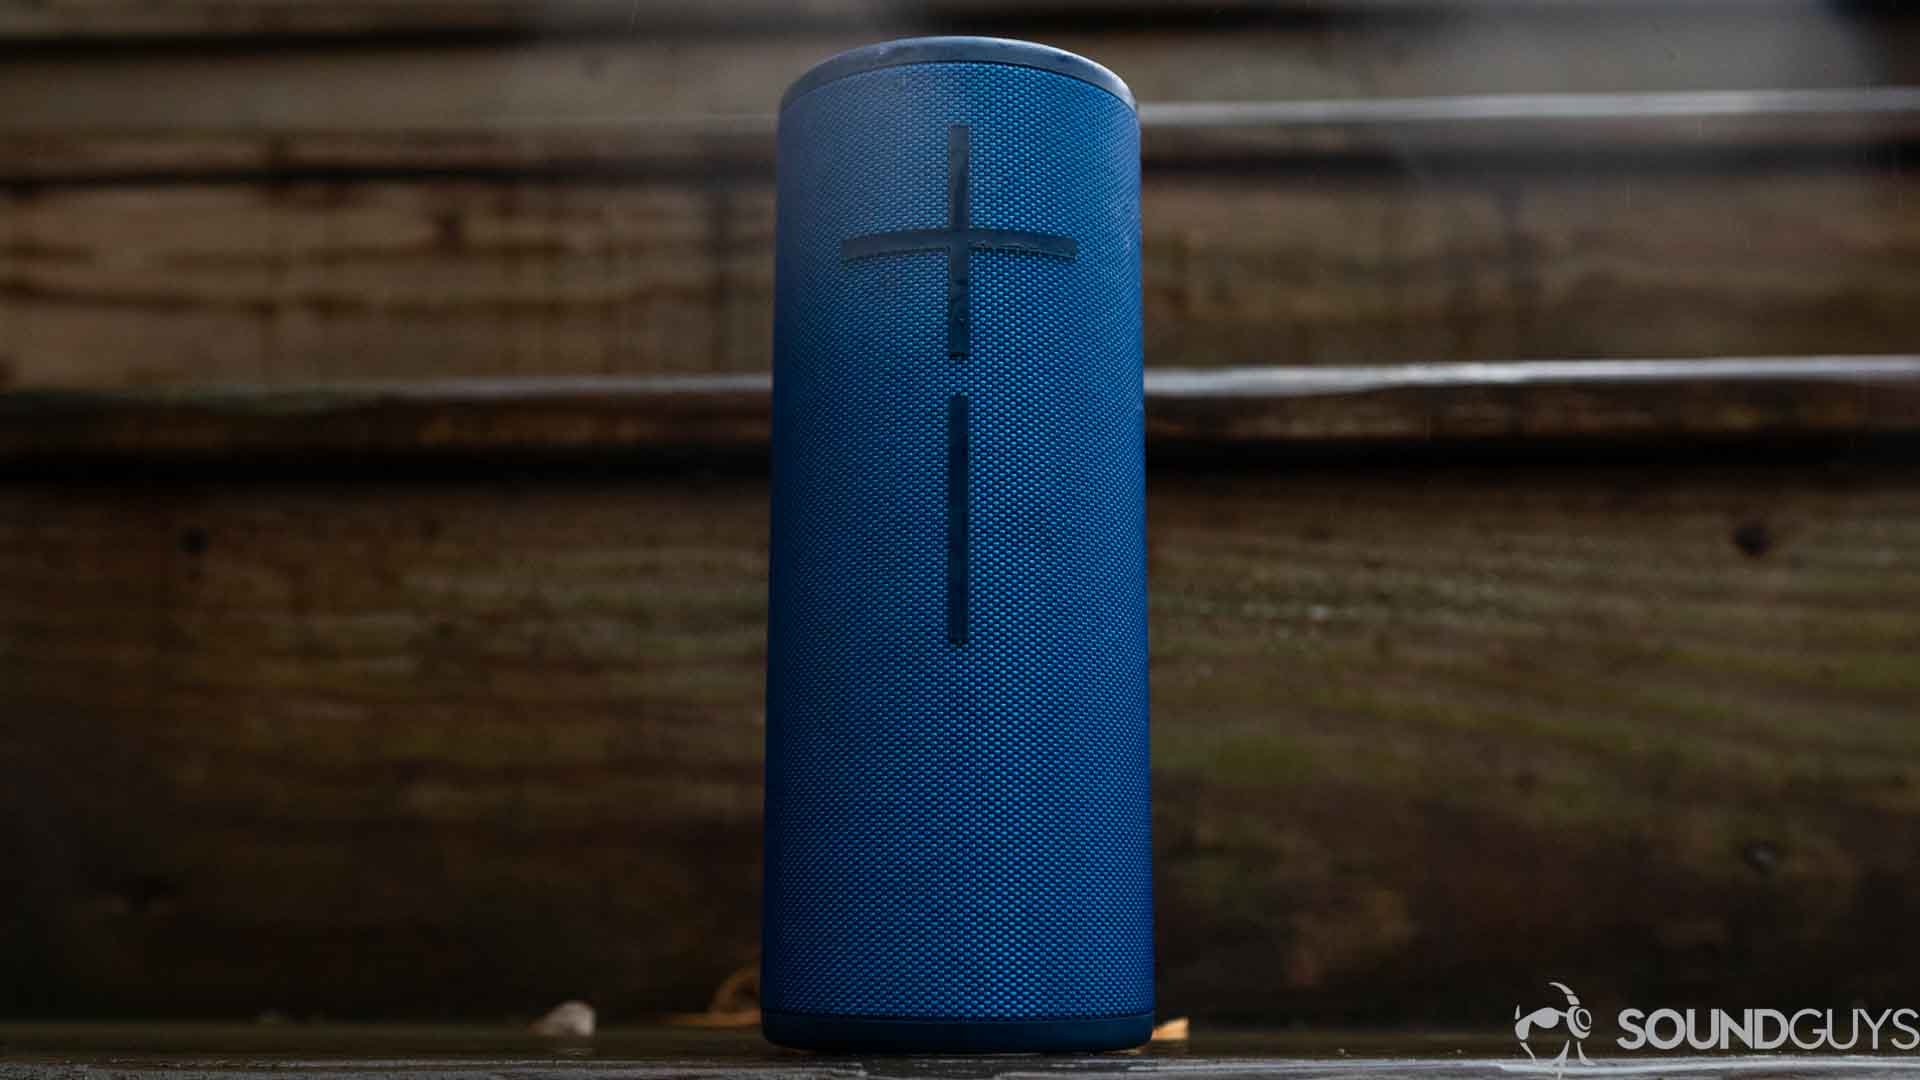 Ue Boom 3 Review A Better Boom From A Similar Speaker